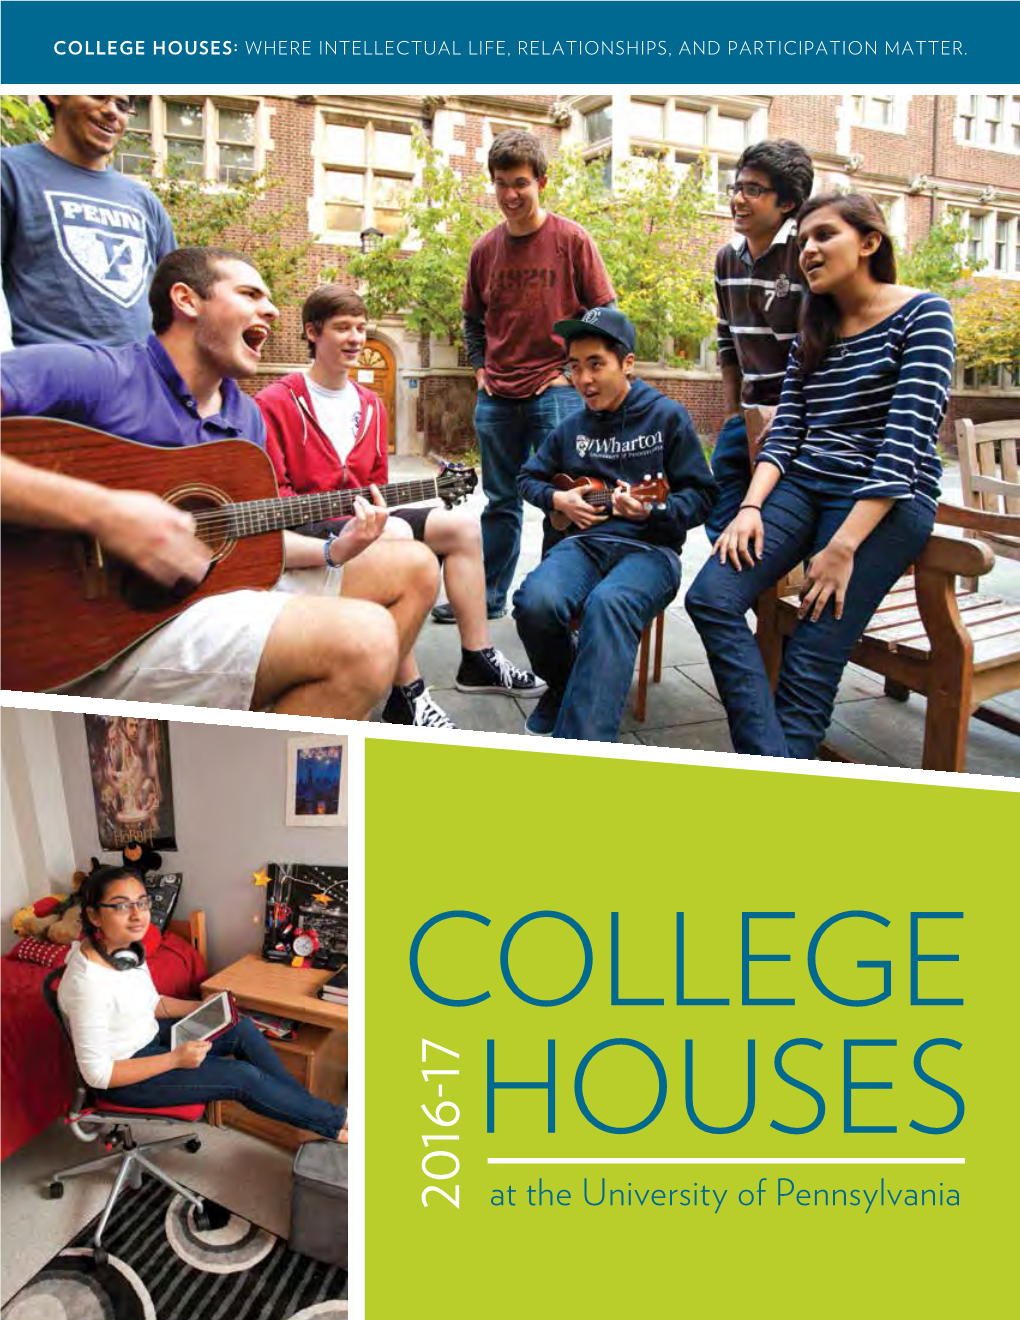 College Houses: Where Intellectual Life, Relationships, and Participation Matter